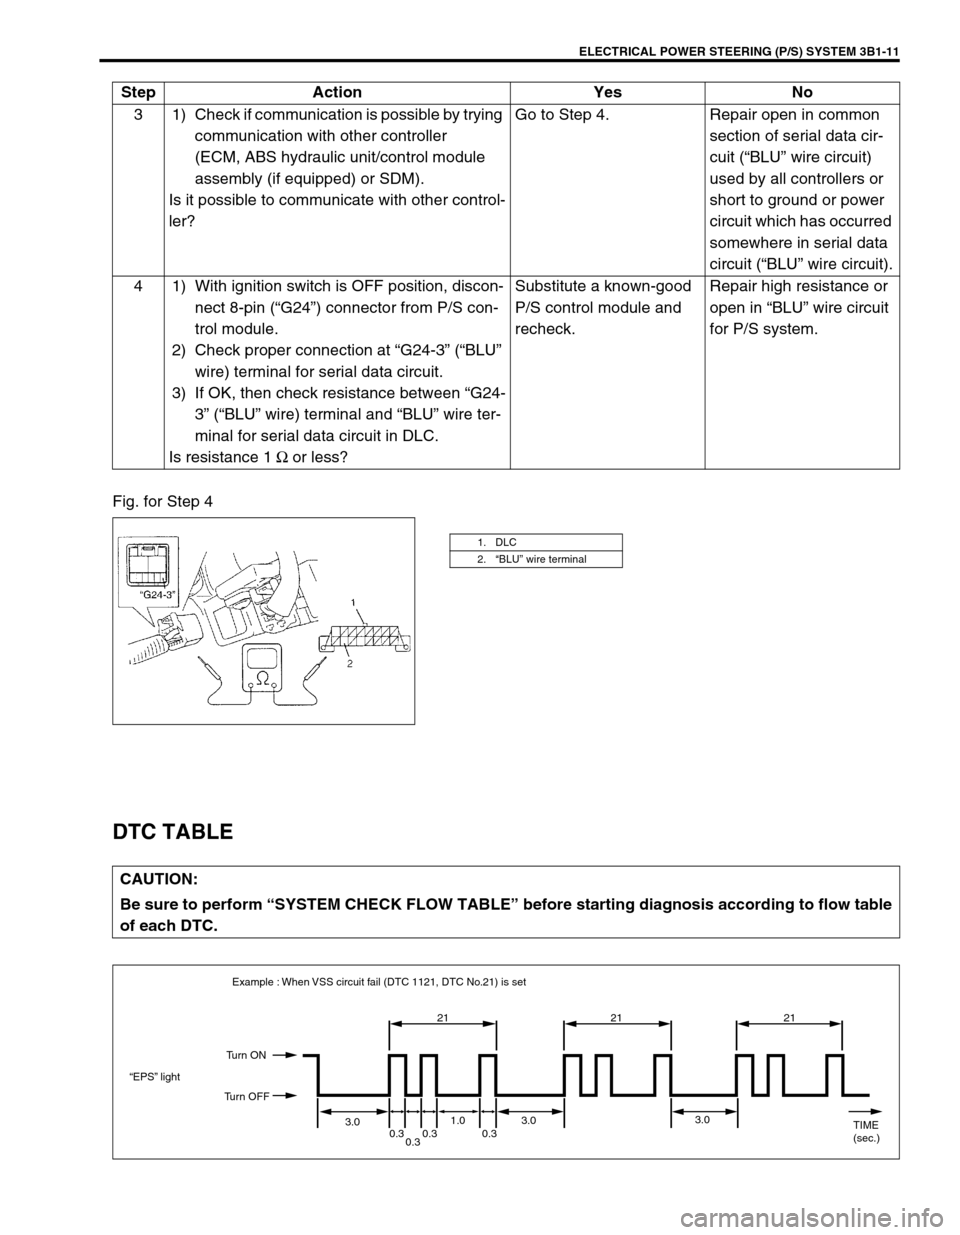 SUZUKI SWIFT 2000 1.G RG413 Service User Guide ELECTRICAL POWER STEERING (P/S) SYSTEM 3B1-11
Fig. for Step 4
DTC TABLE
3 1) Check if communication is possible by trying 
communication with other controller 
(ECM, ABS hydraulic unit/control module 